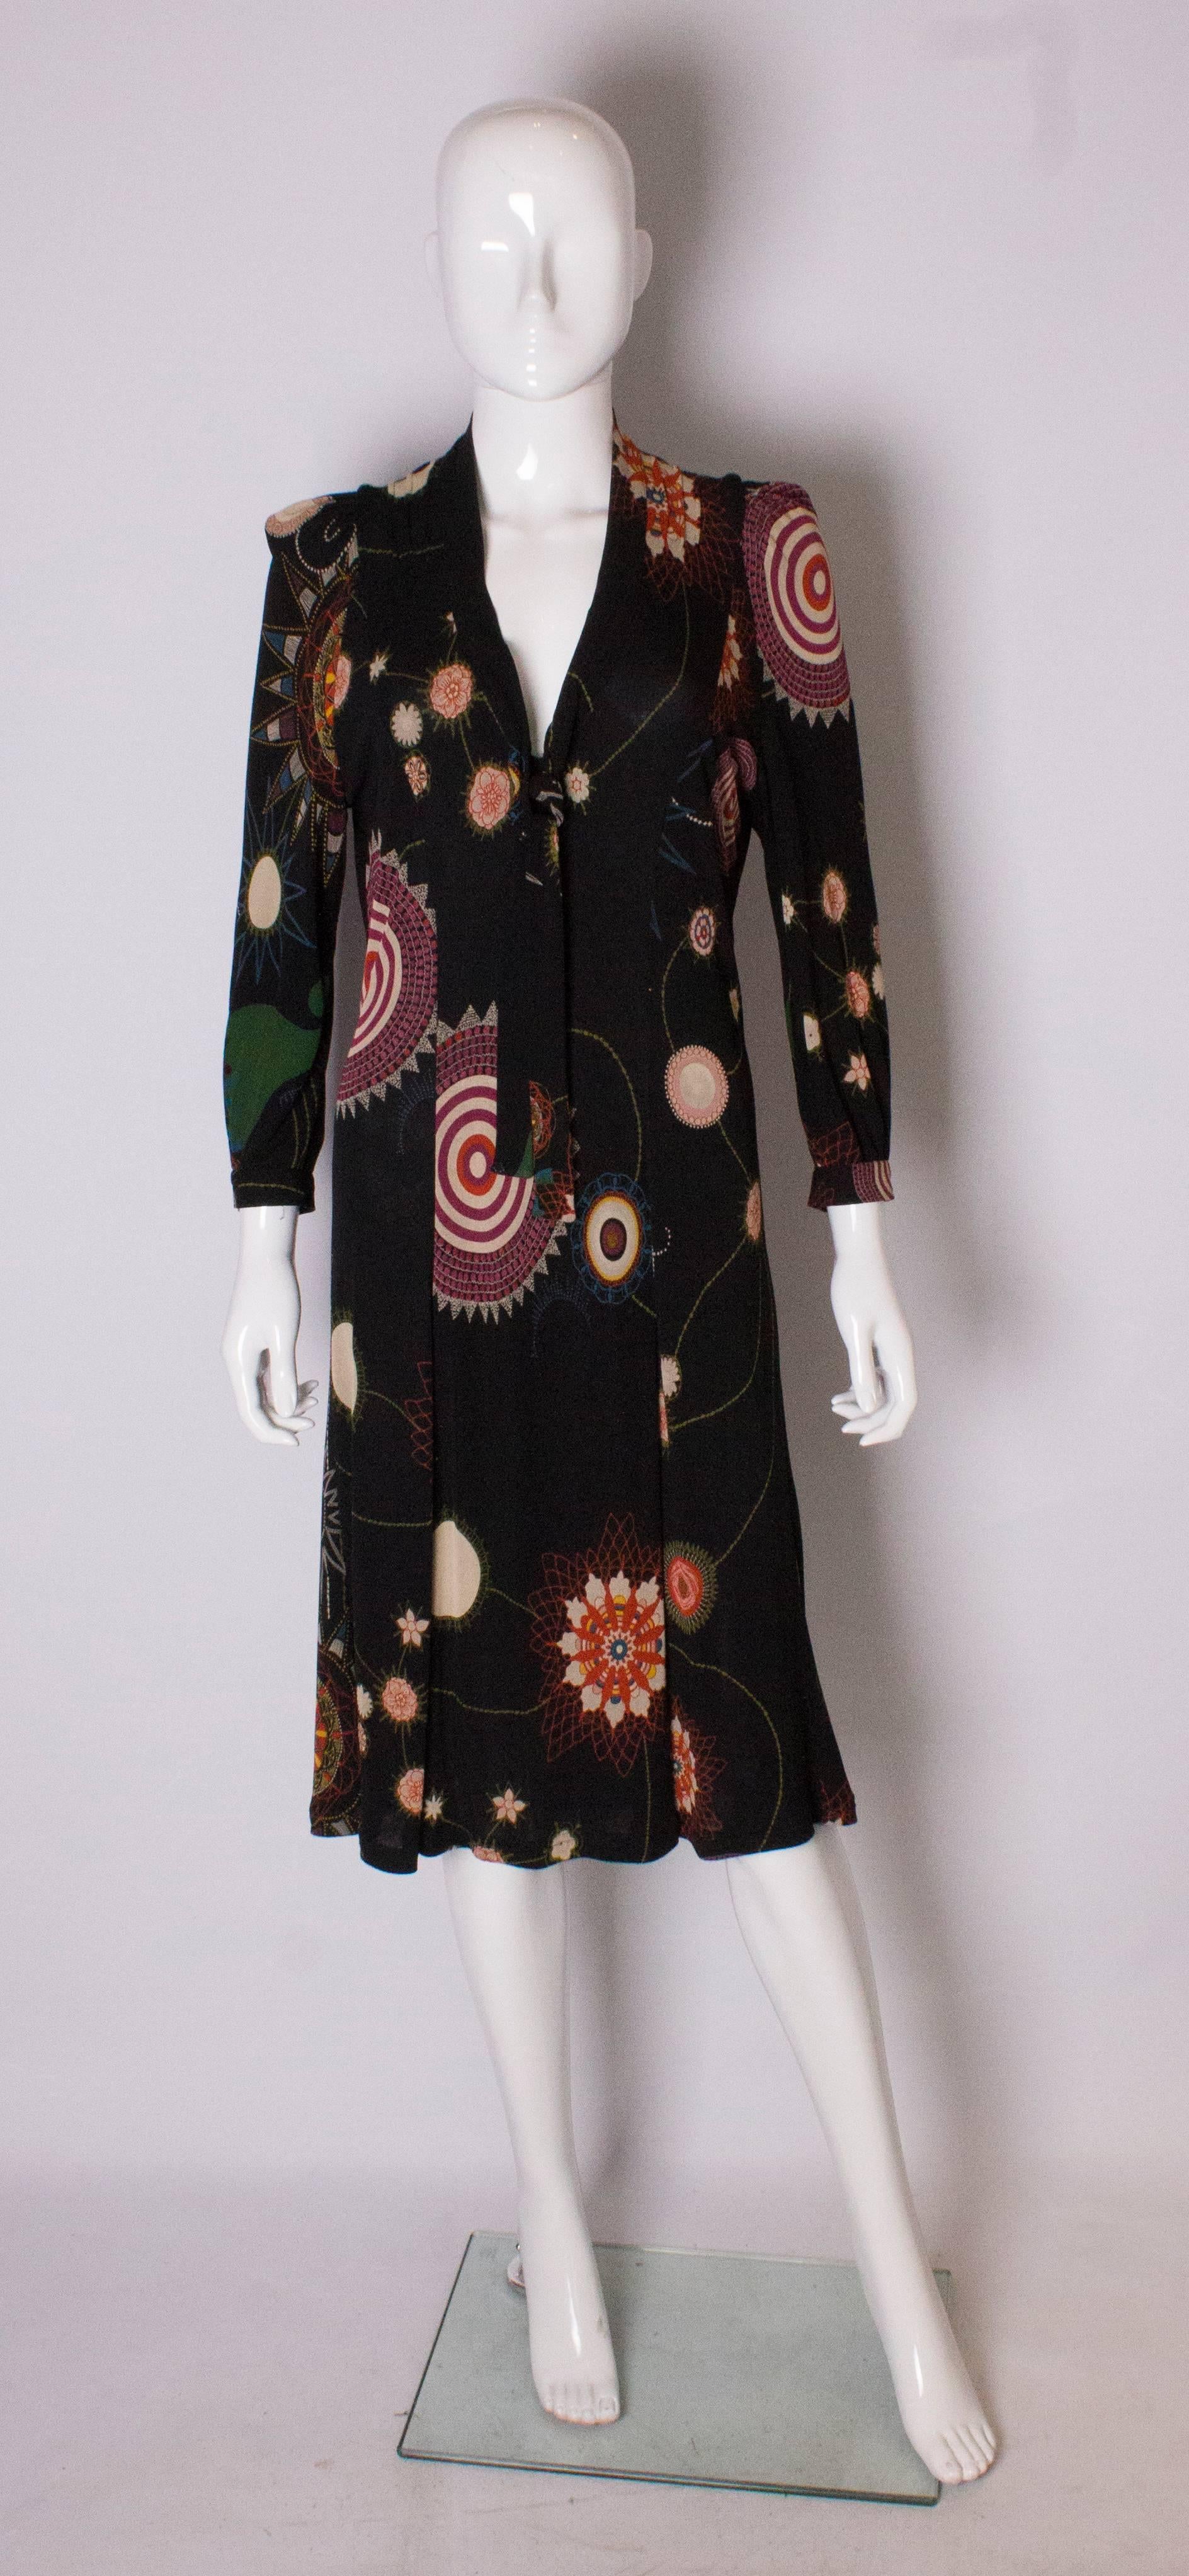 A chic and easy to wear   dress by Christian Lacroix, Bazaar line. The dress has a  black background with  a mulit coloured print. It has pleats on the shoulder and v neck with a tie neck that can be worn tied or loose. The dress has a side zip